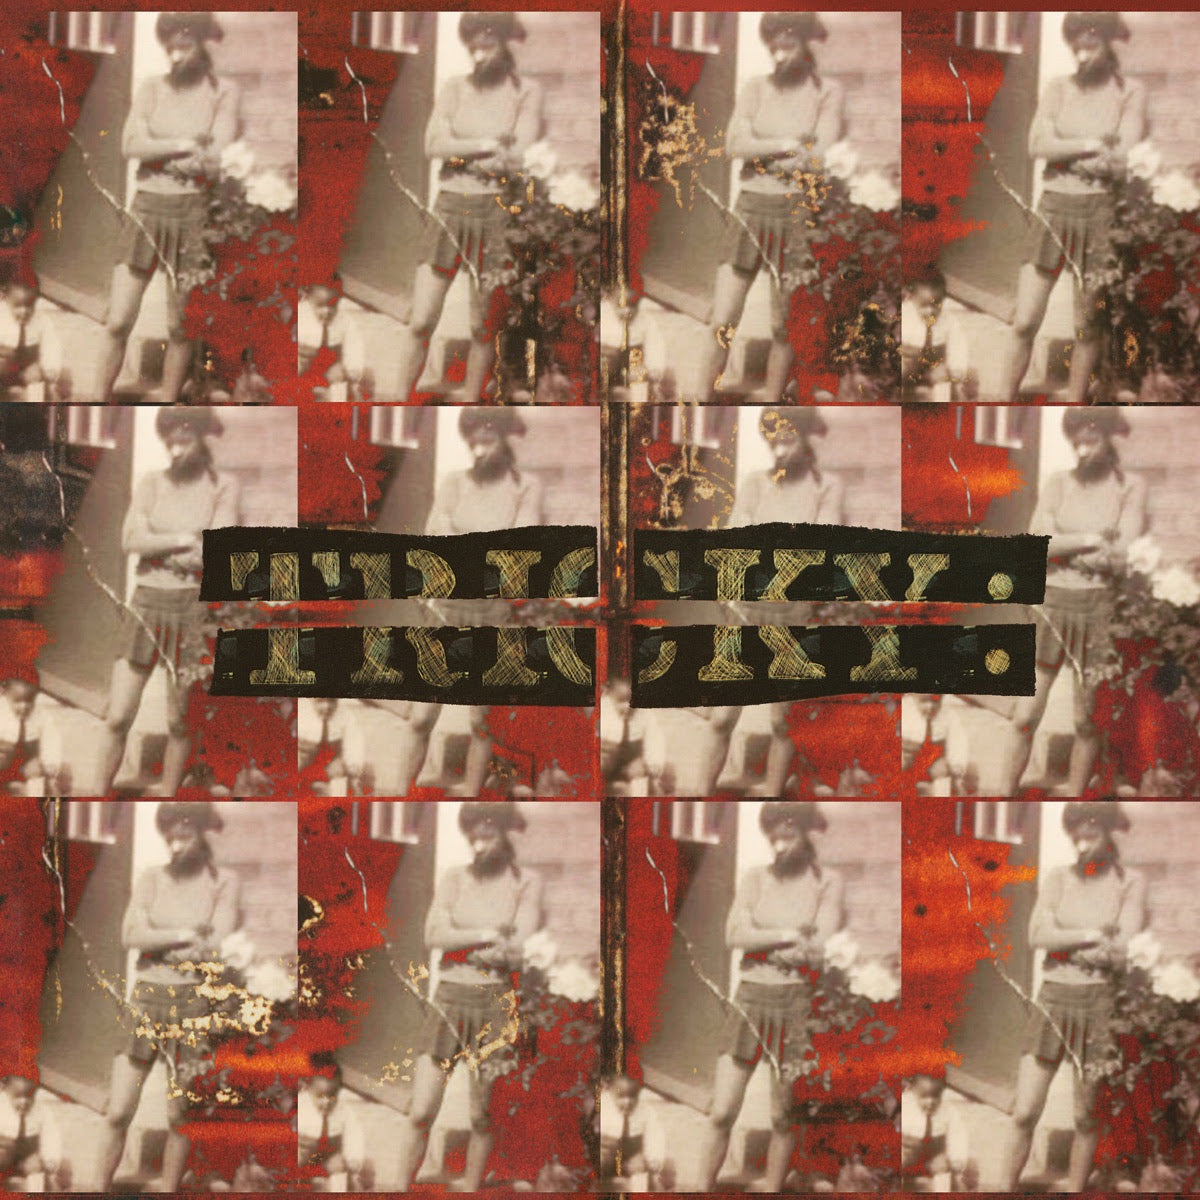 Tricky - Maxinquaye (Reincarnated) | Buy the Vinyl LP from Flying Nun Records